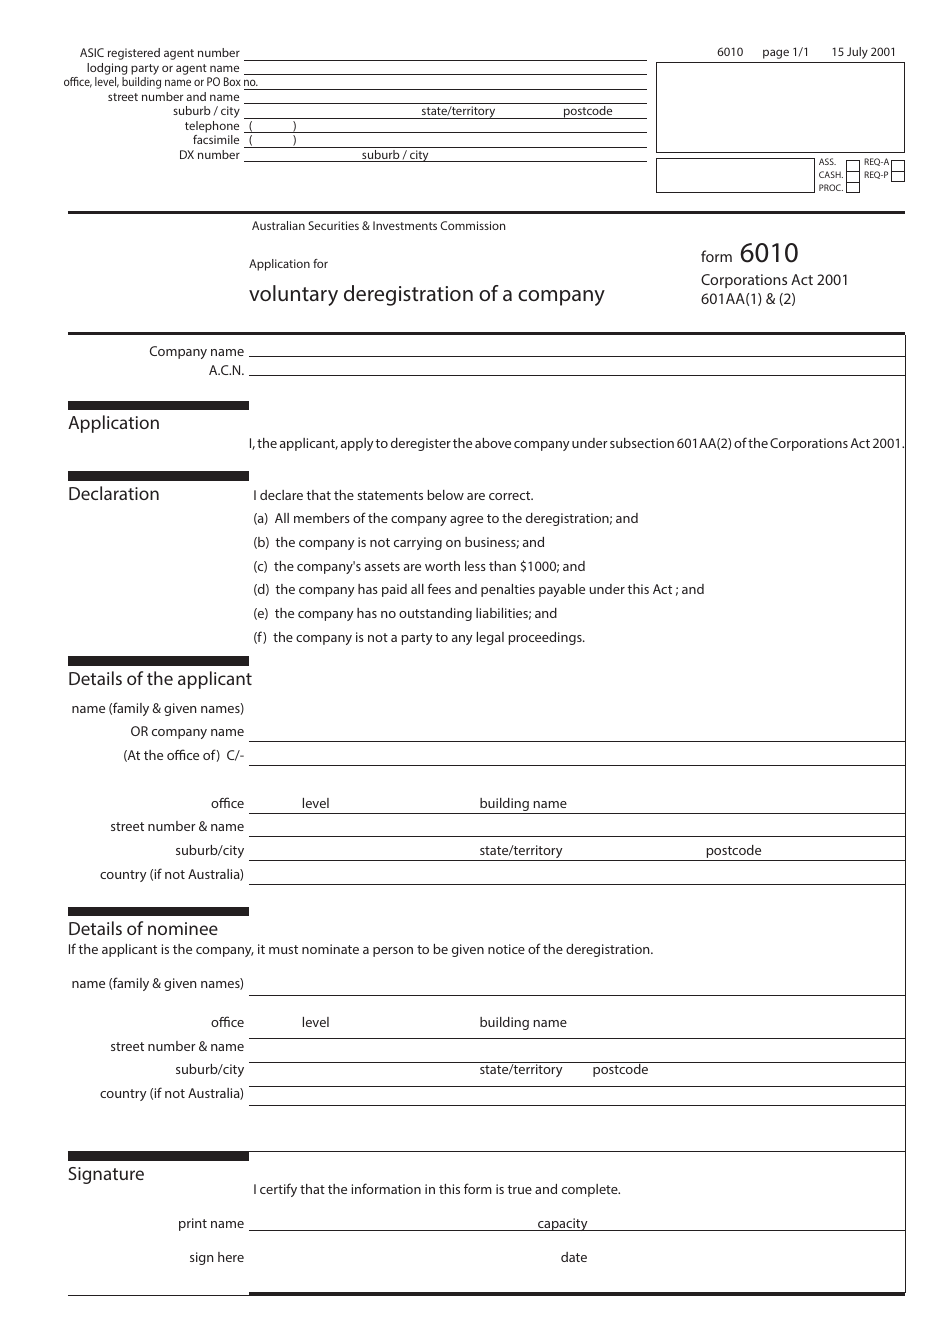 Form 6010 Application for Voluntary Deregistration of a Company - Australia, Page 1